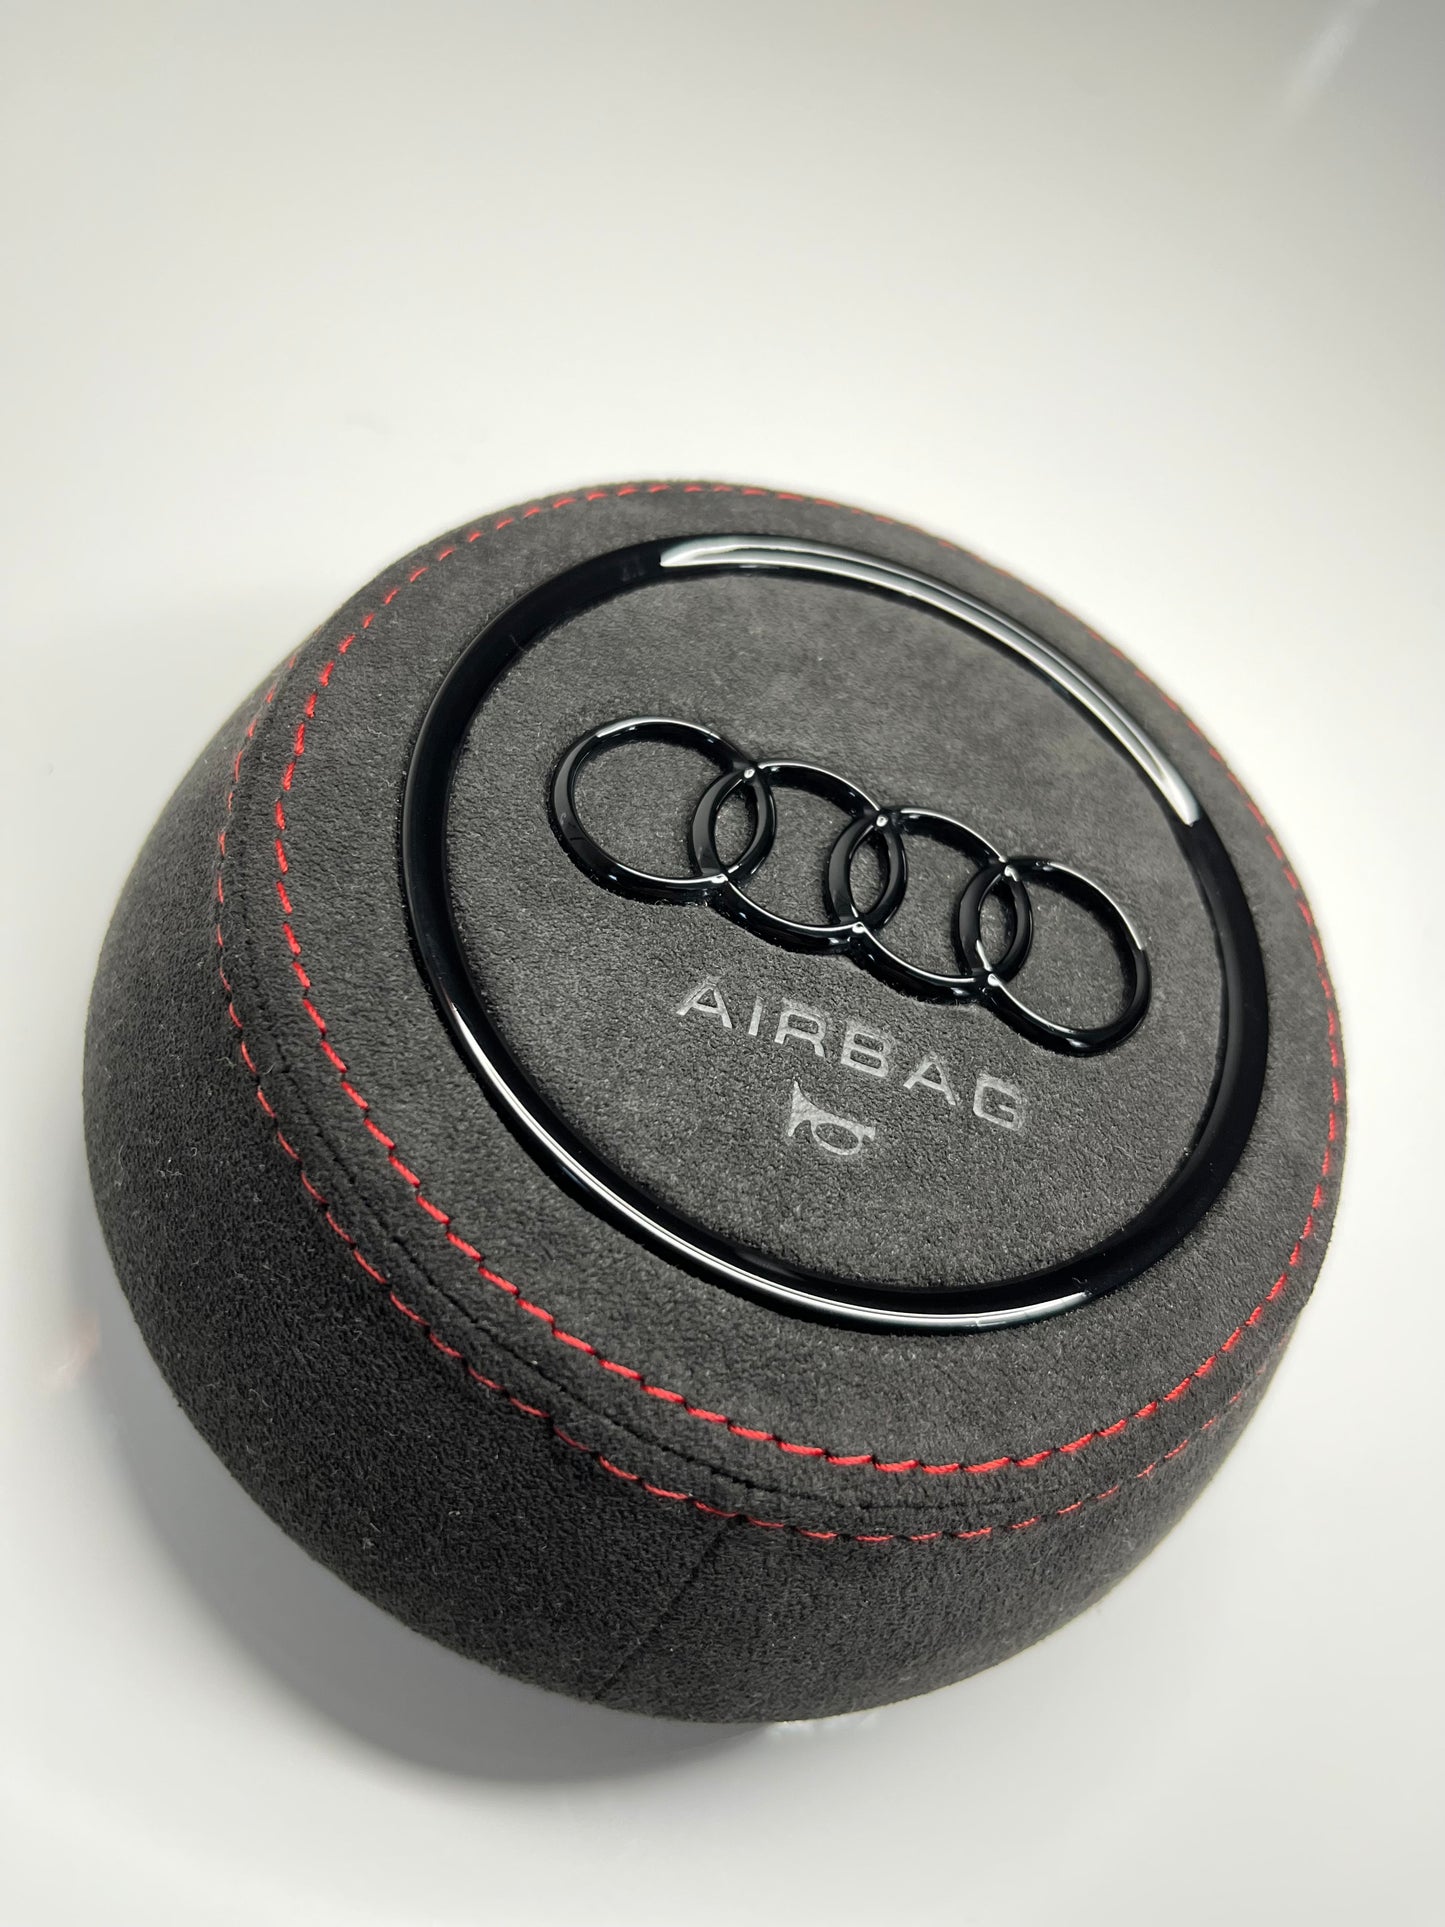 Airbag Cover for Audi A3 8V - A4 A5 B9